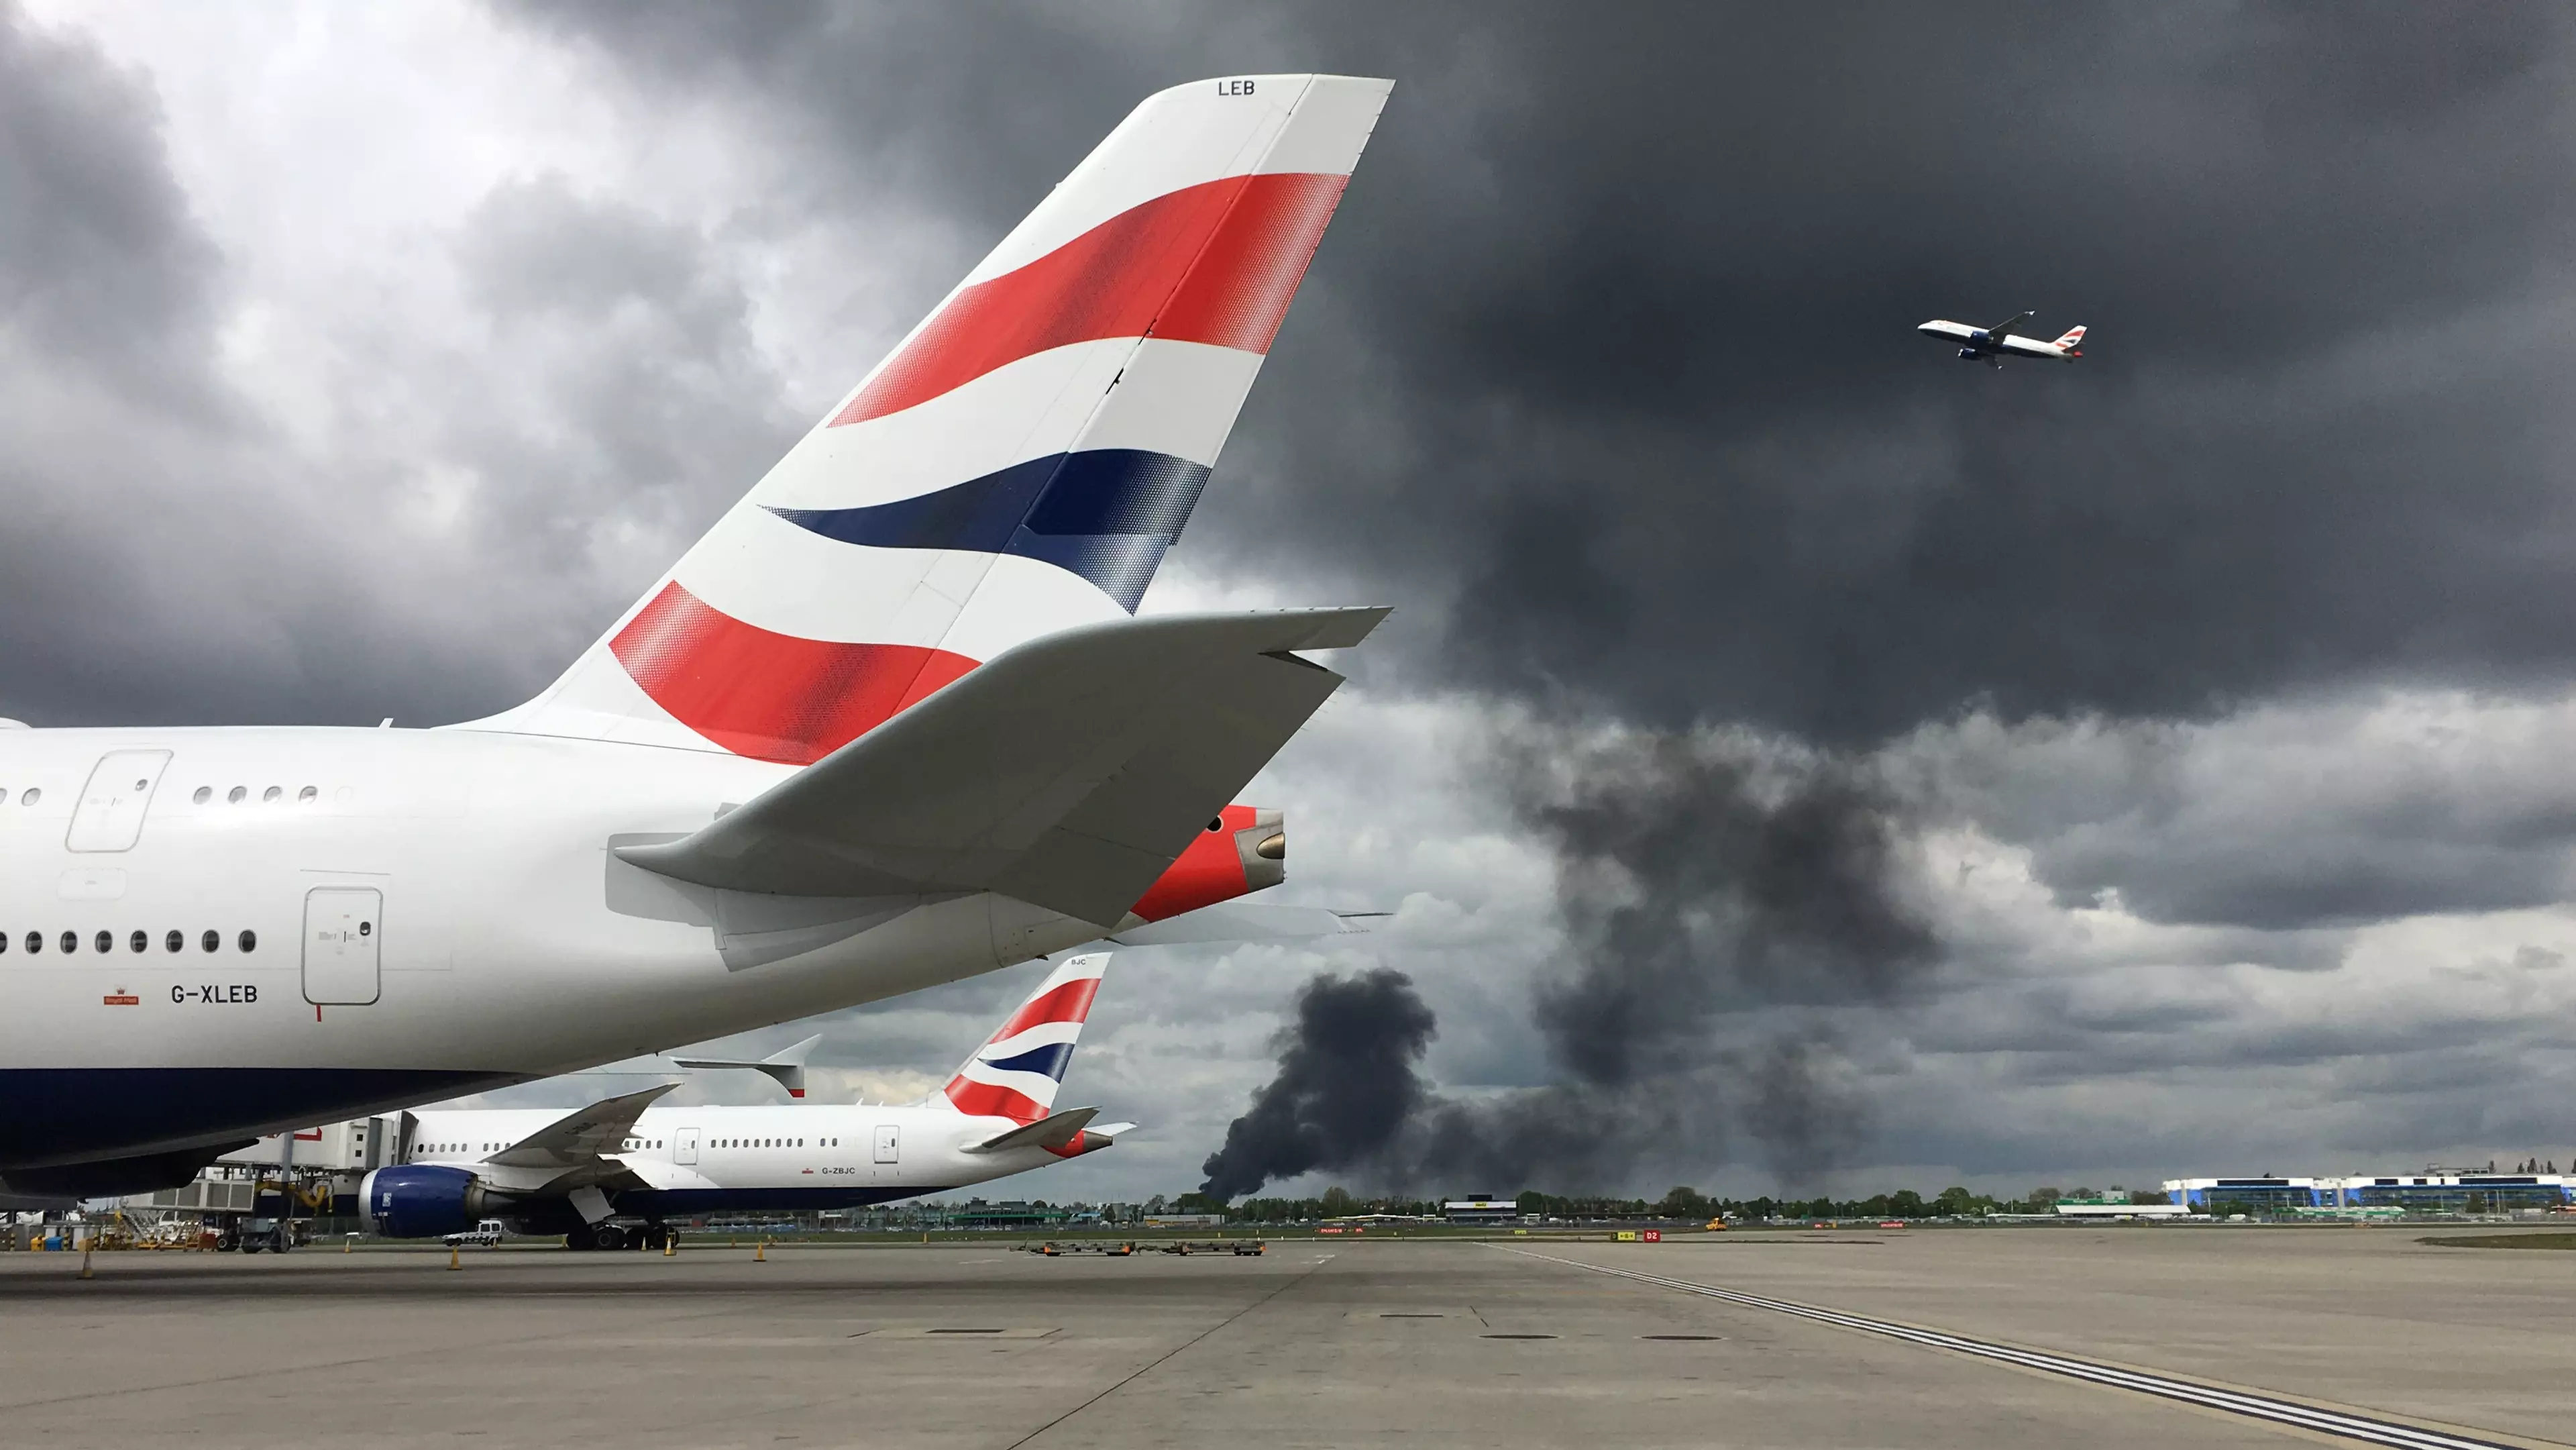 Fire Breaks Out At Warehouse Near London's Heathrow Airport